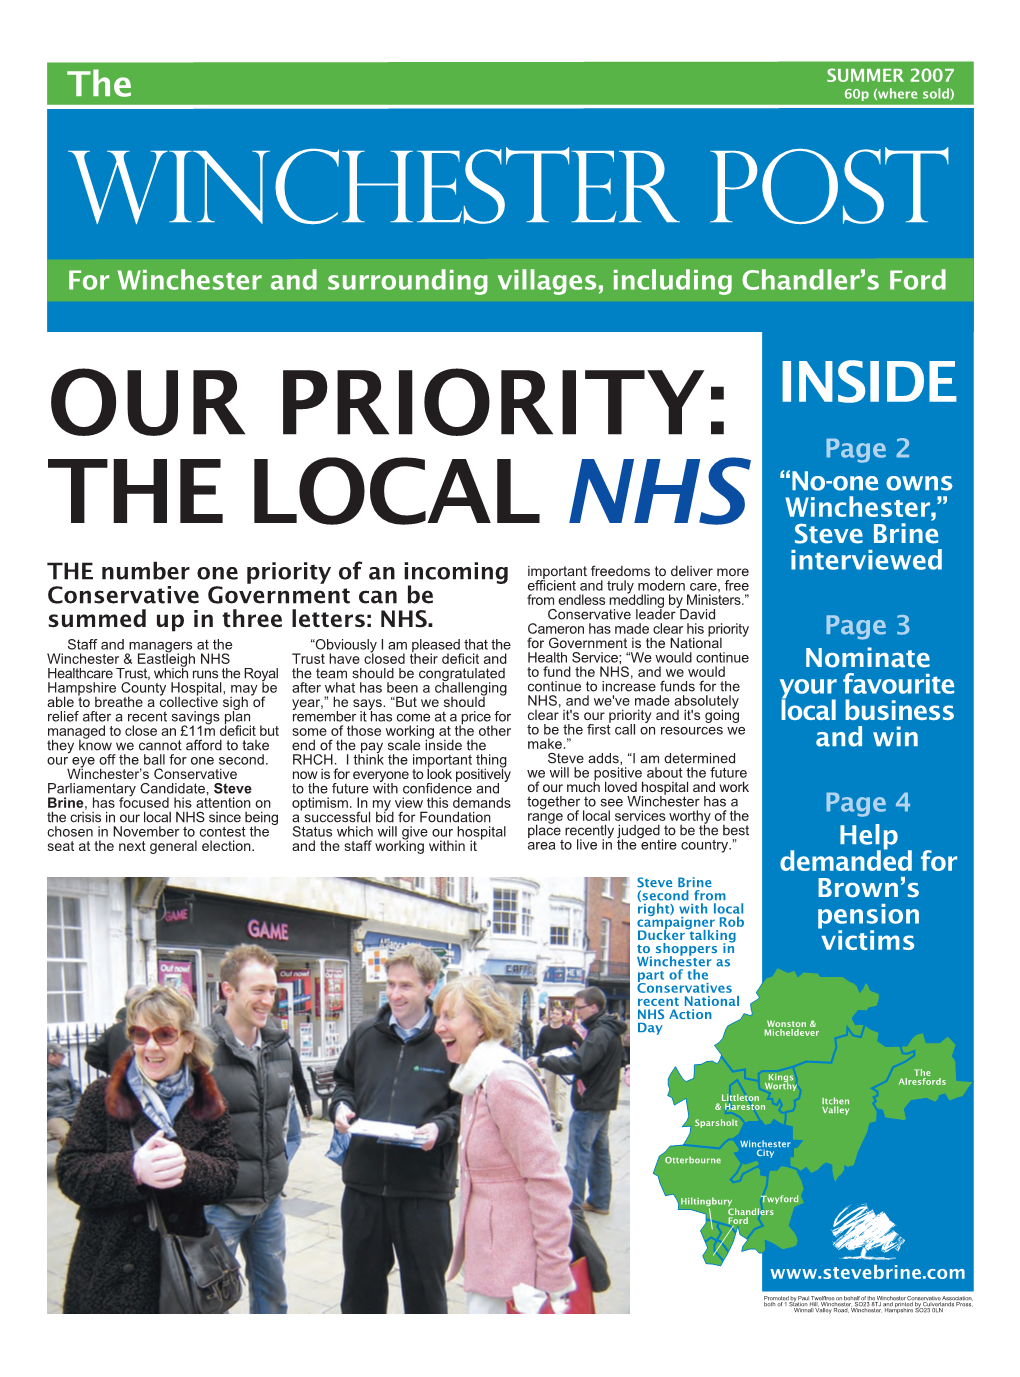 The Winchester Post